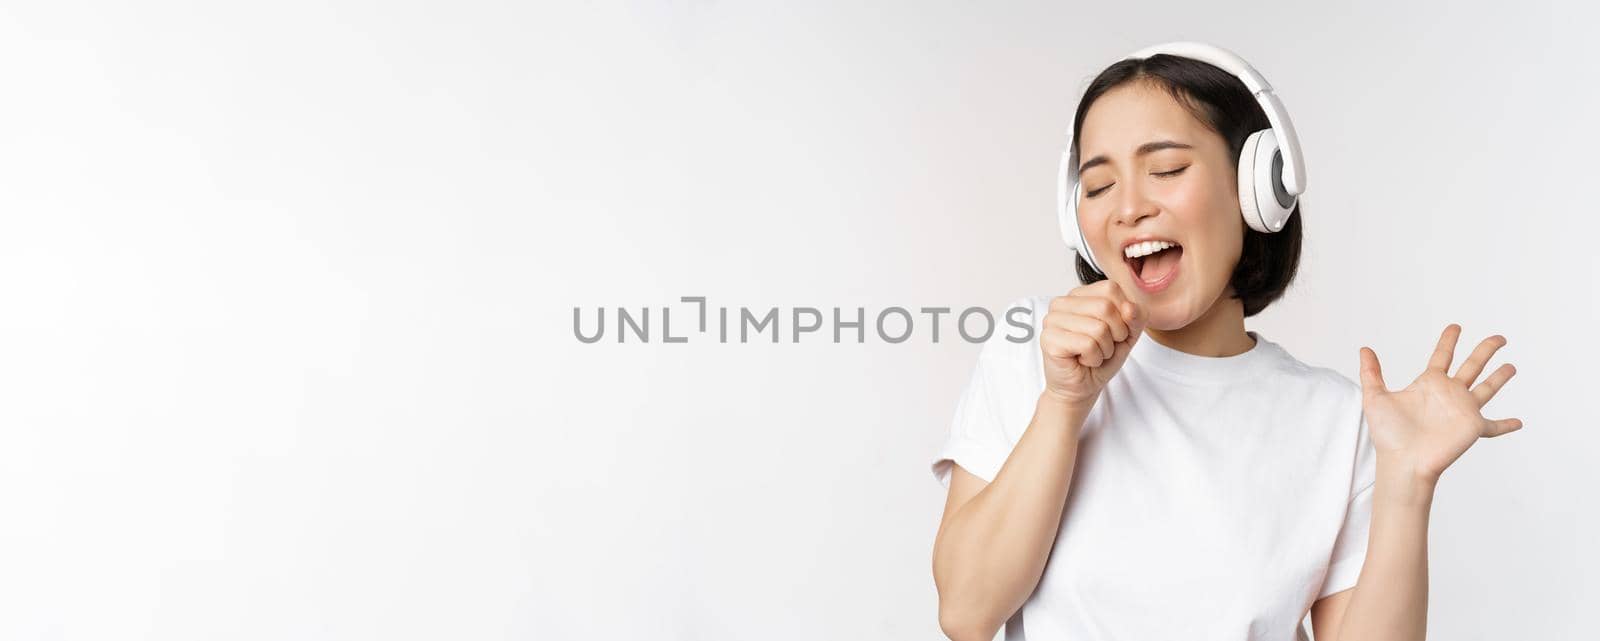 Korean girl sings and listents music in headphones, having fun, stands over white background. Copy space